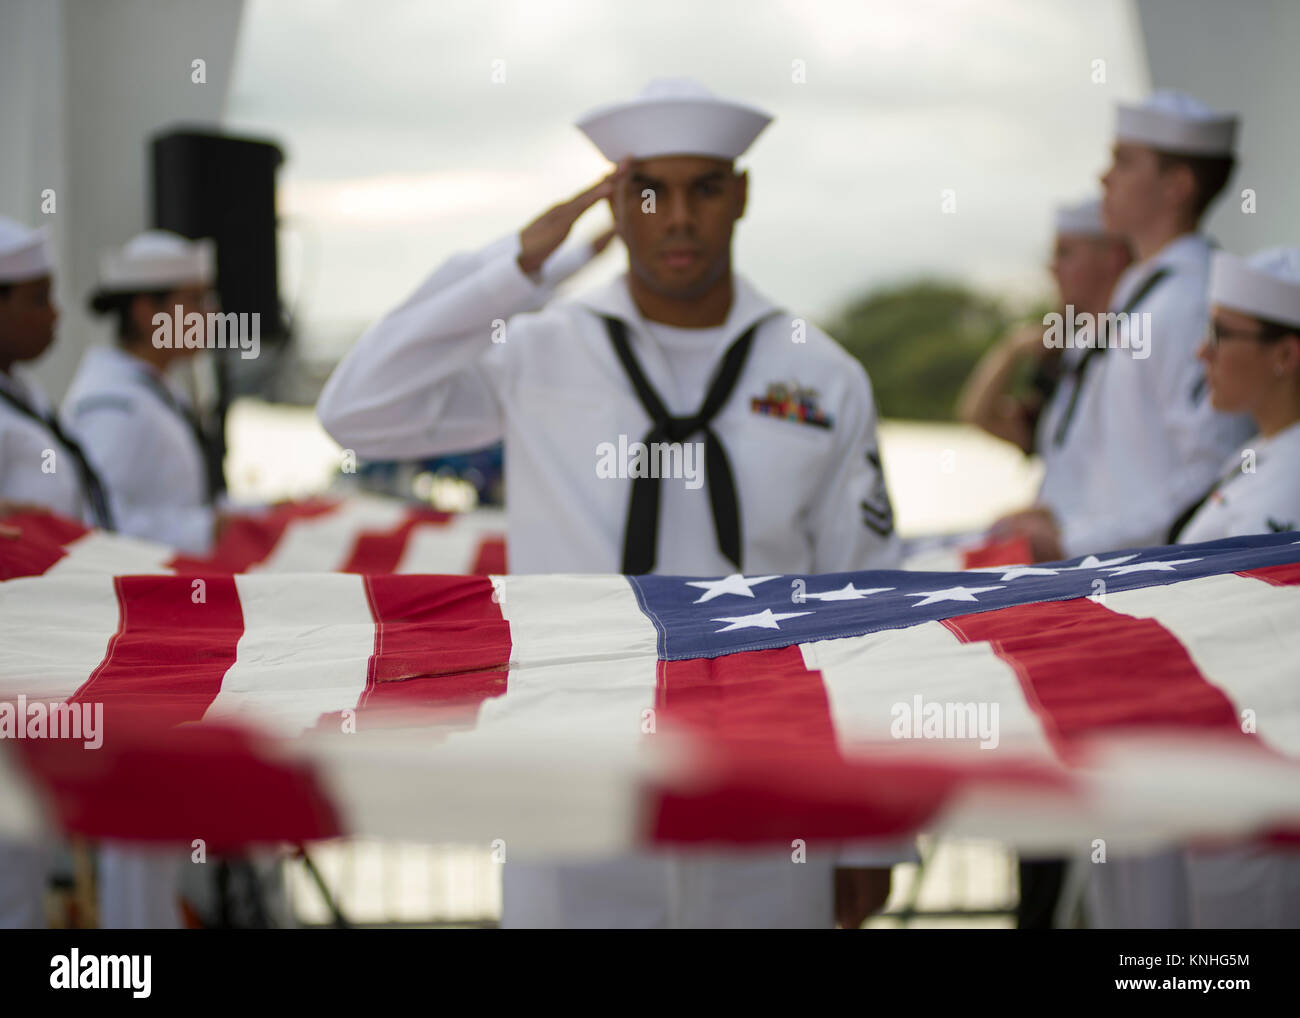 U.S. sailors prepare the American flag for presentation during the dual interment of two deceased World War II veterans from the ship USS Arizona during the 75th anniversary commemoration of the attacks on Pearl Harbor December 7, 2016 in Pearl Harbor, Hawaii. (photo by PO2 Somers Steelman via Planetpix) Stock Photo